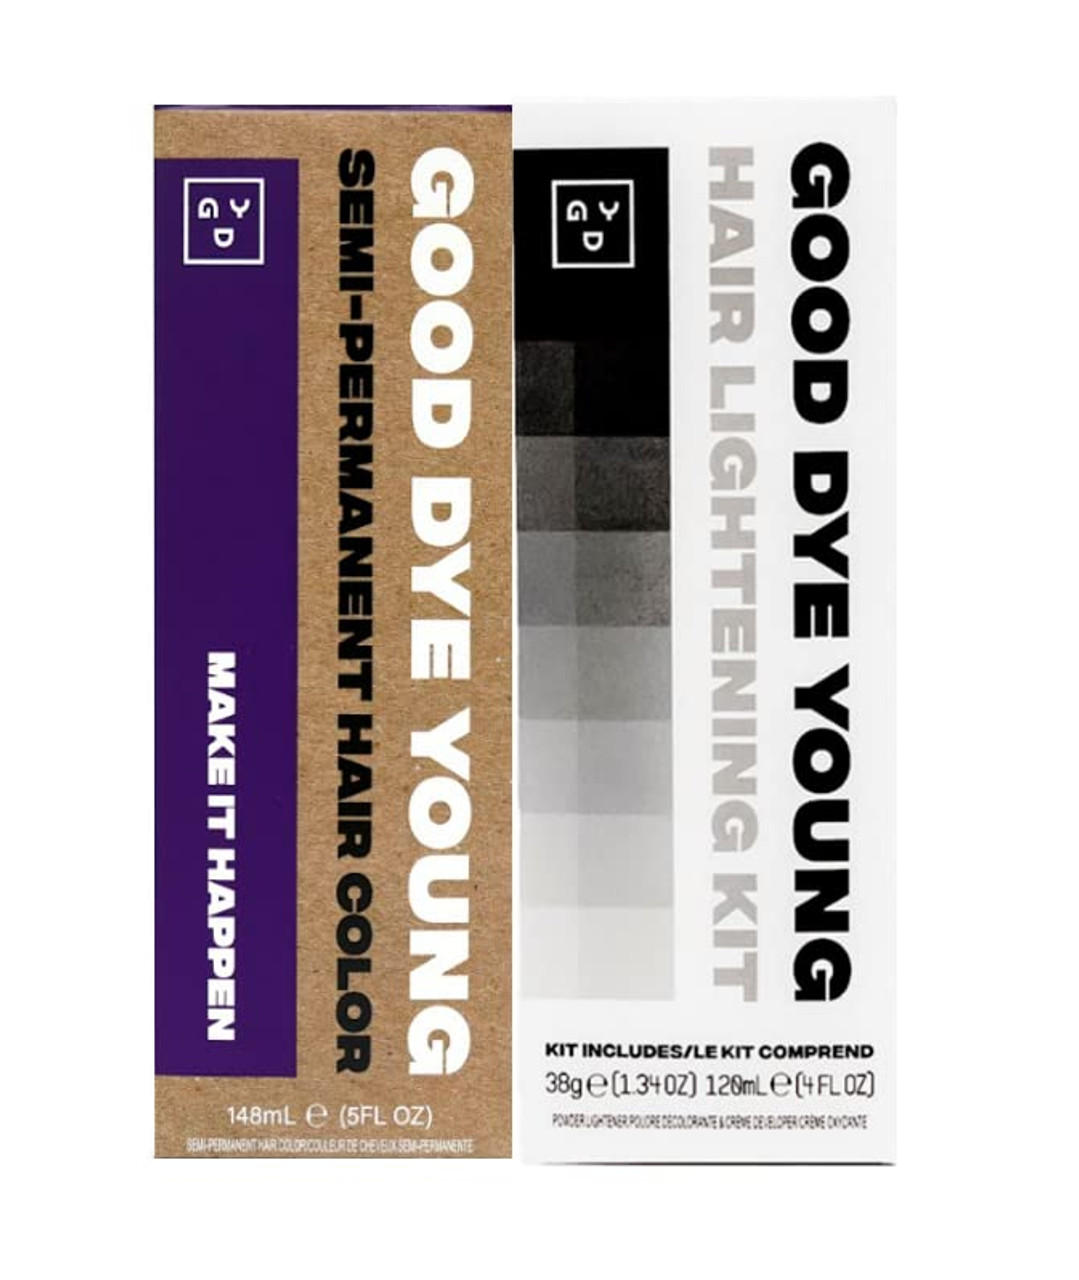 Good Dye Young Semi-Permanent Hair Color